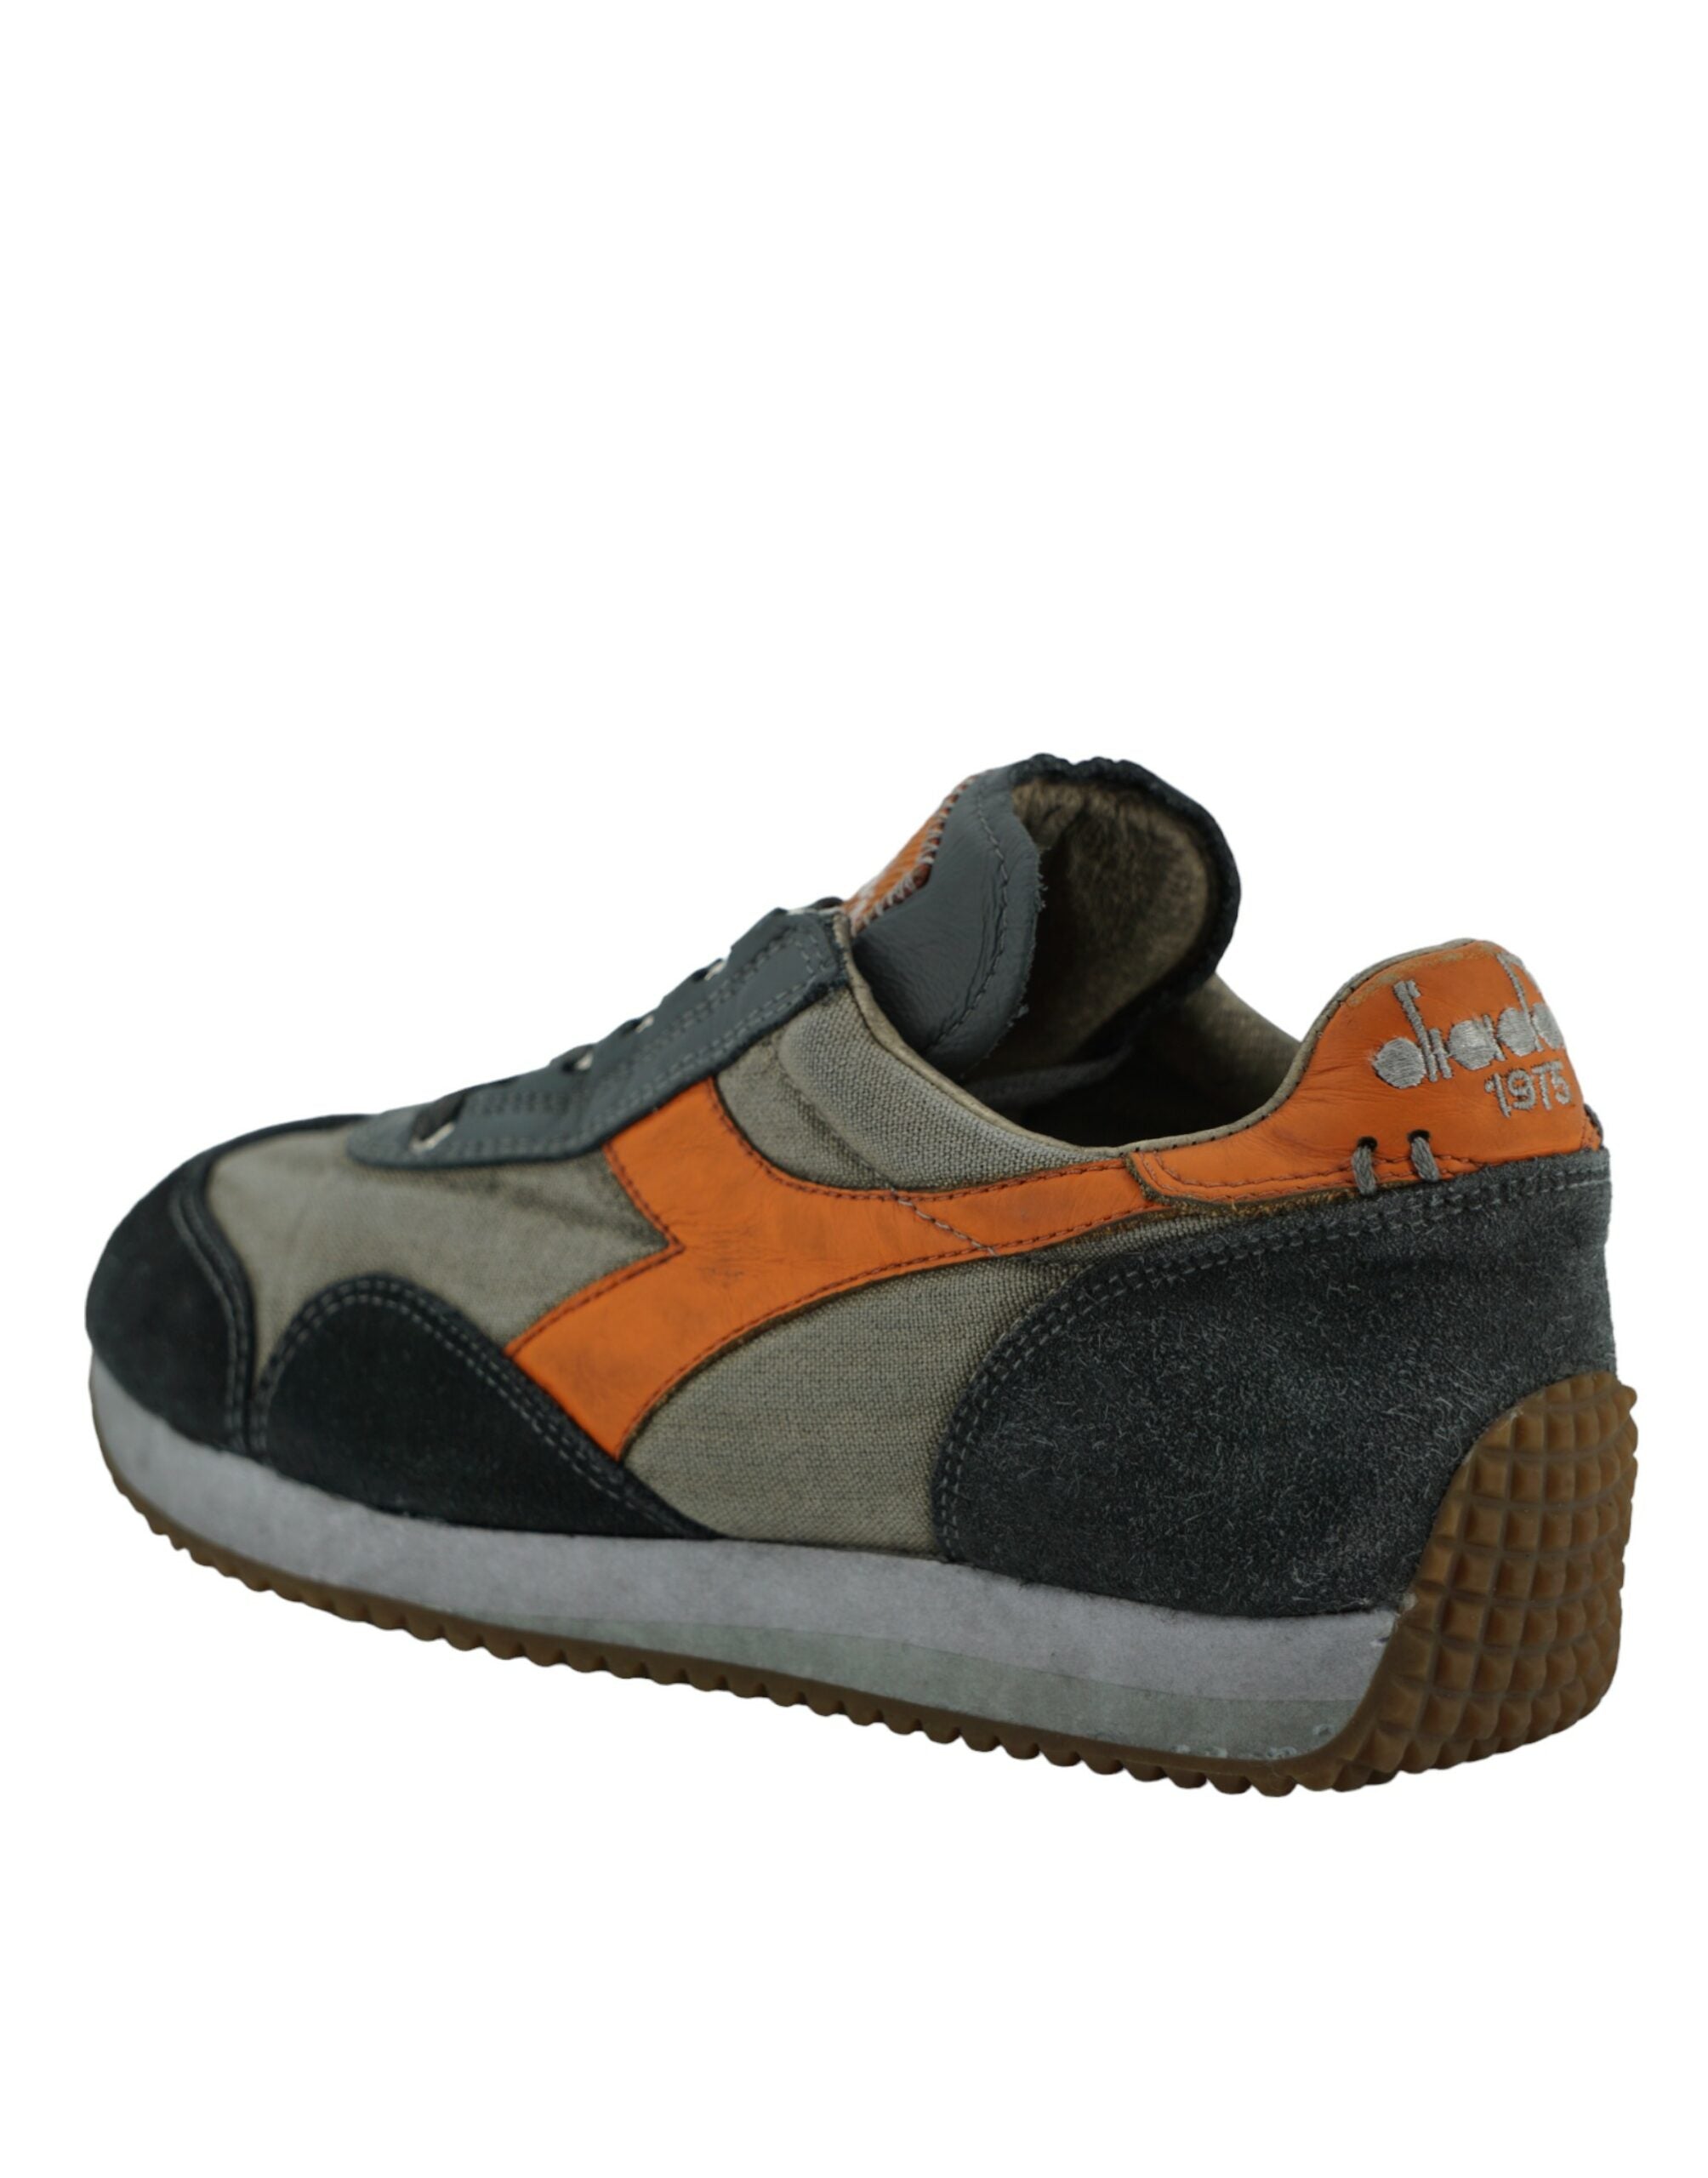 Diadora Vintage Inspired Equipe H Dirty Stone Wash Sneakers